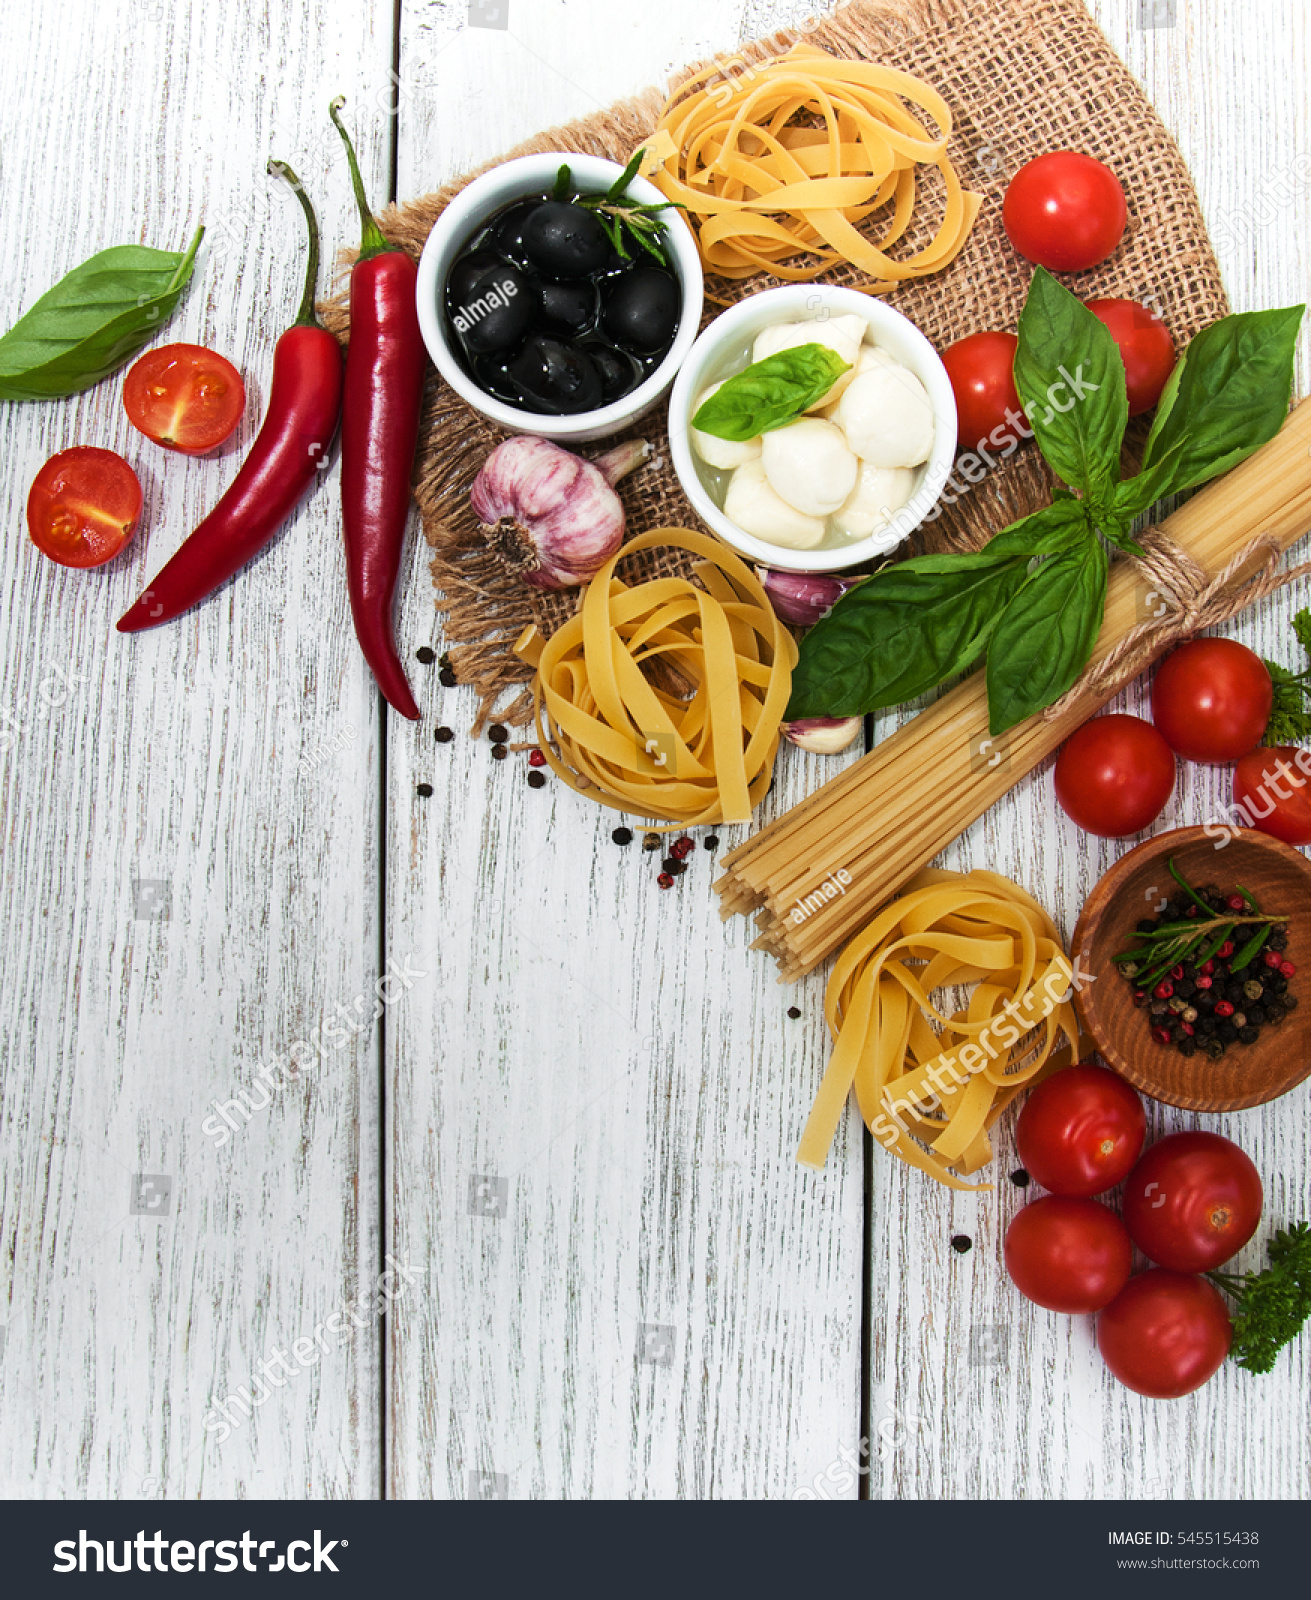 Italian Food Ingredients On Old Wooden Stock Photo (Royalty Free ...